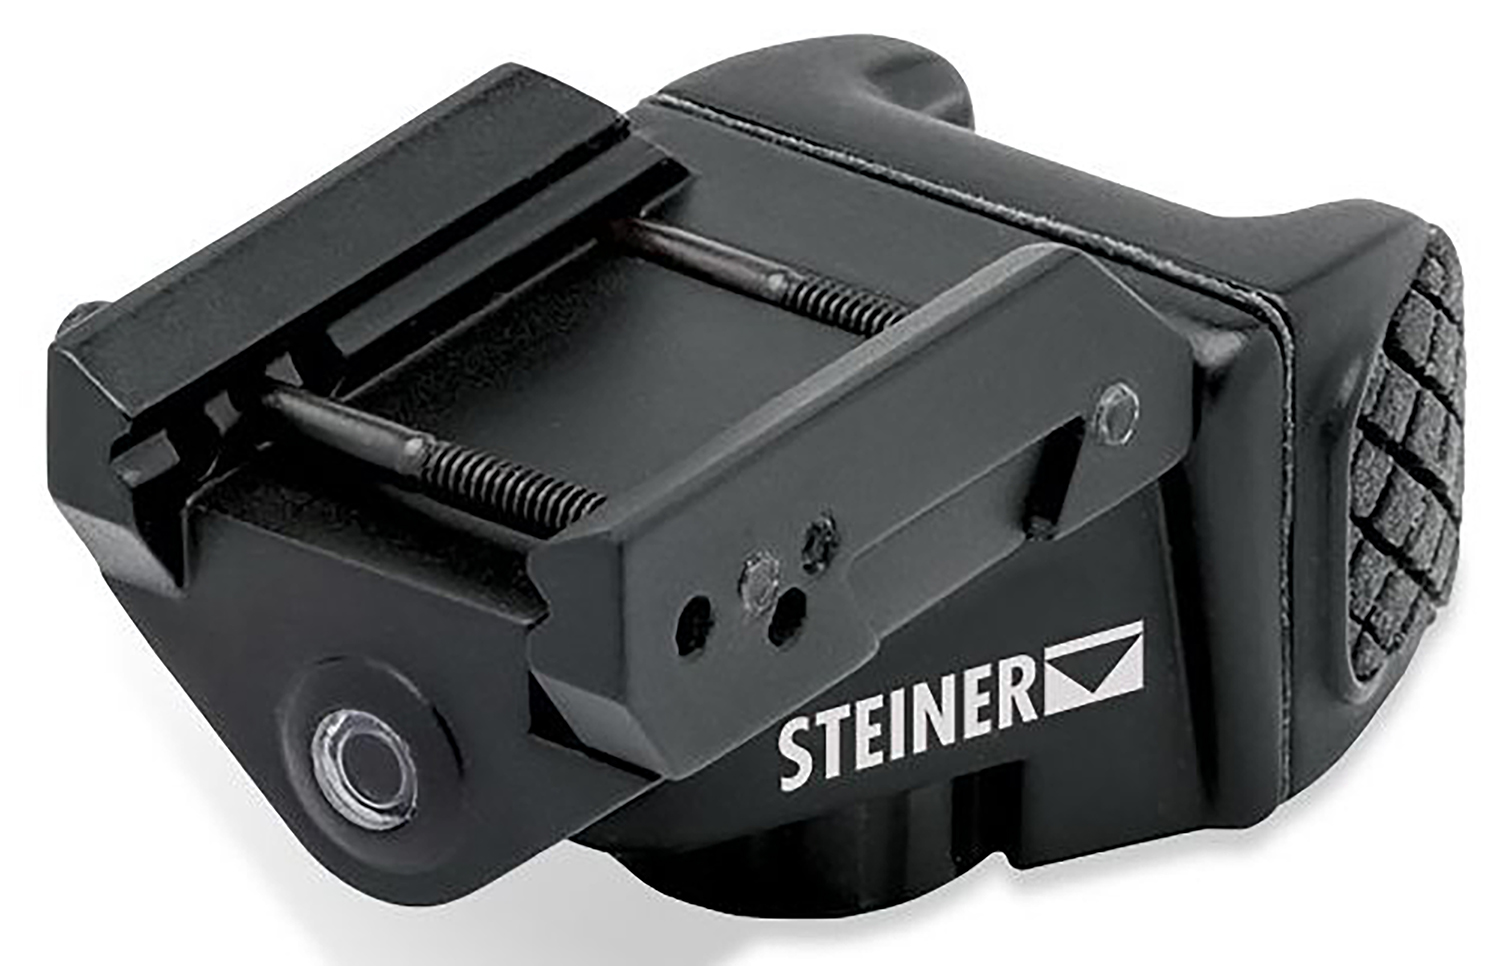 Steiner 7006 TOR Mini  5mW Red Laser with 635nM Wavelength & Black Finish for Picatinny or Weaver Rail Equipped Pistol